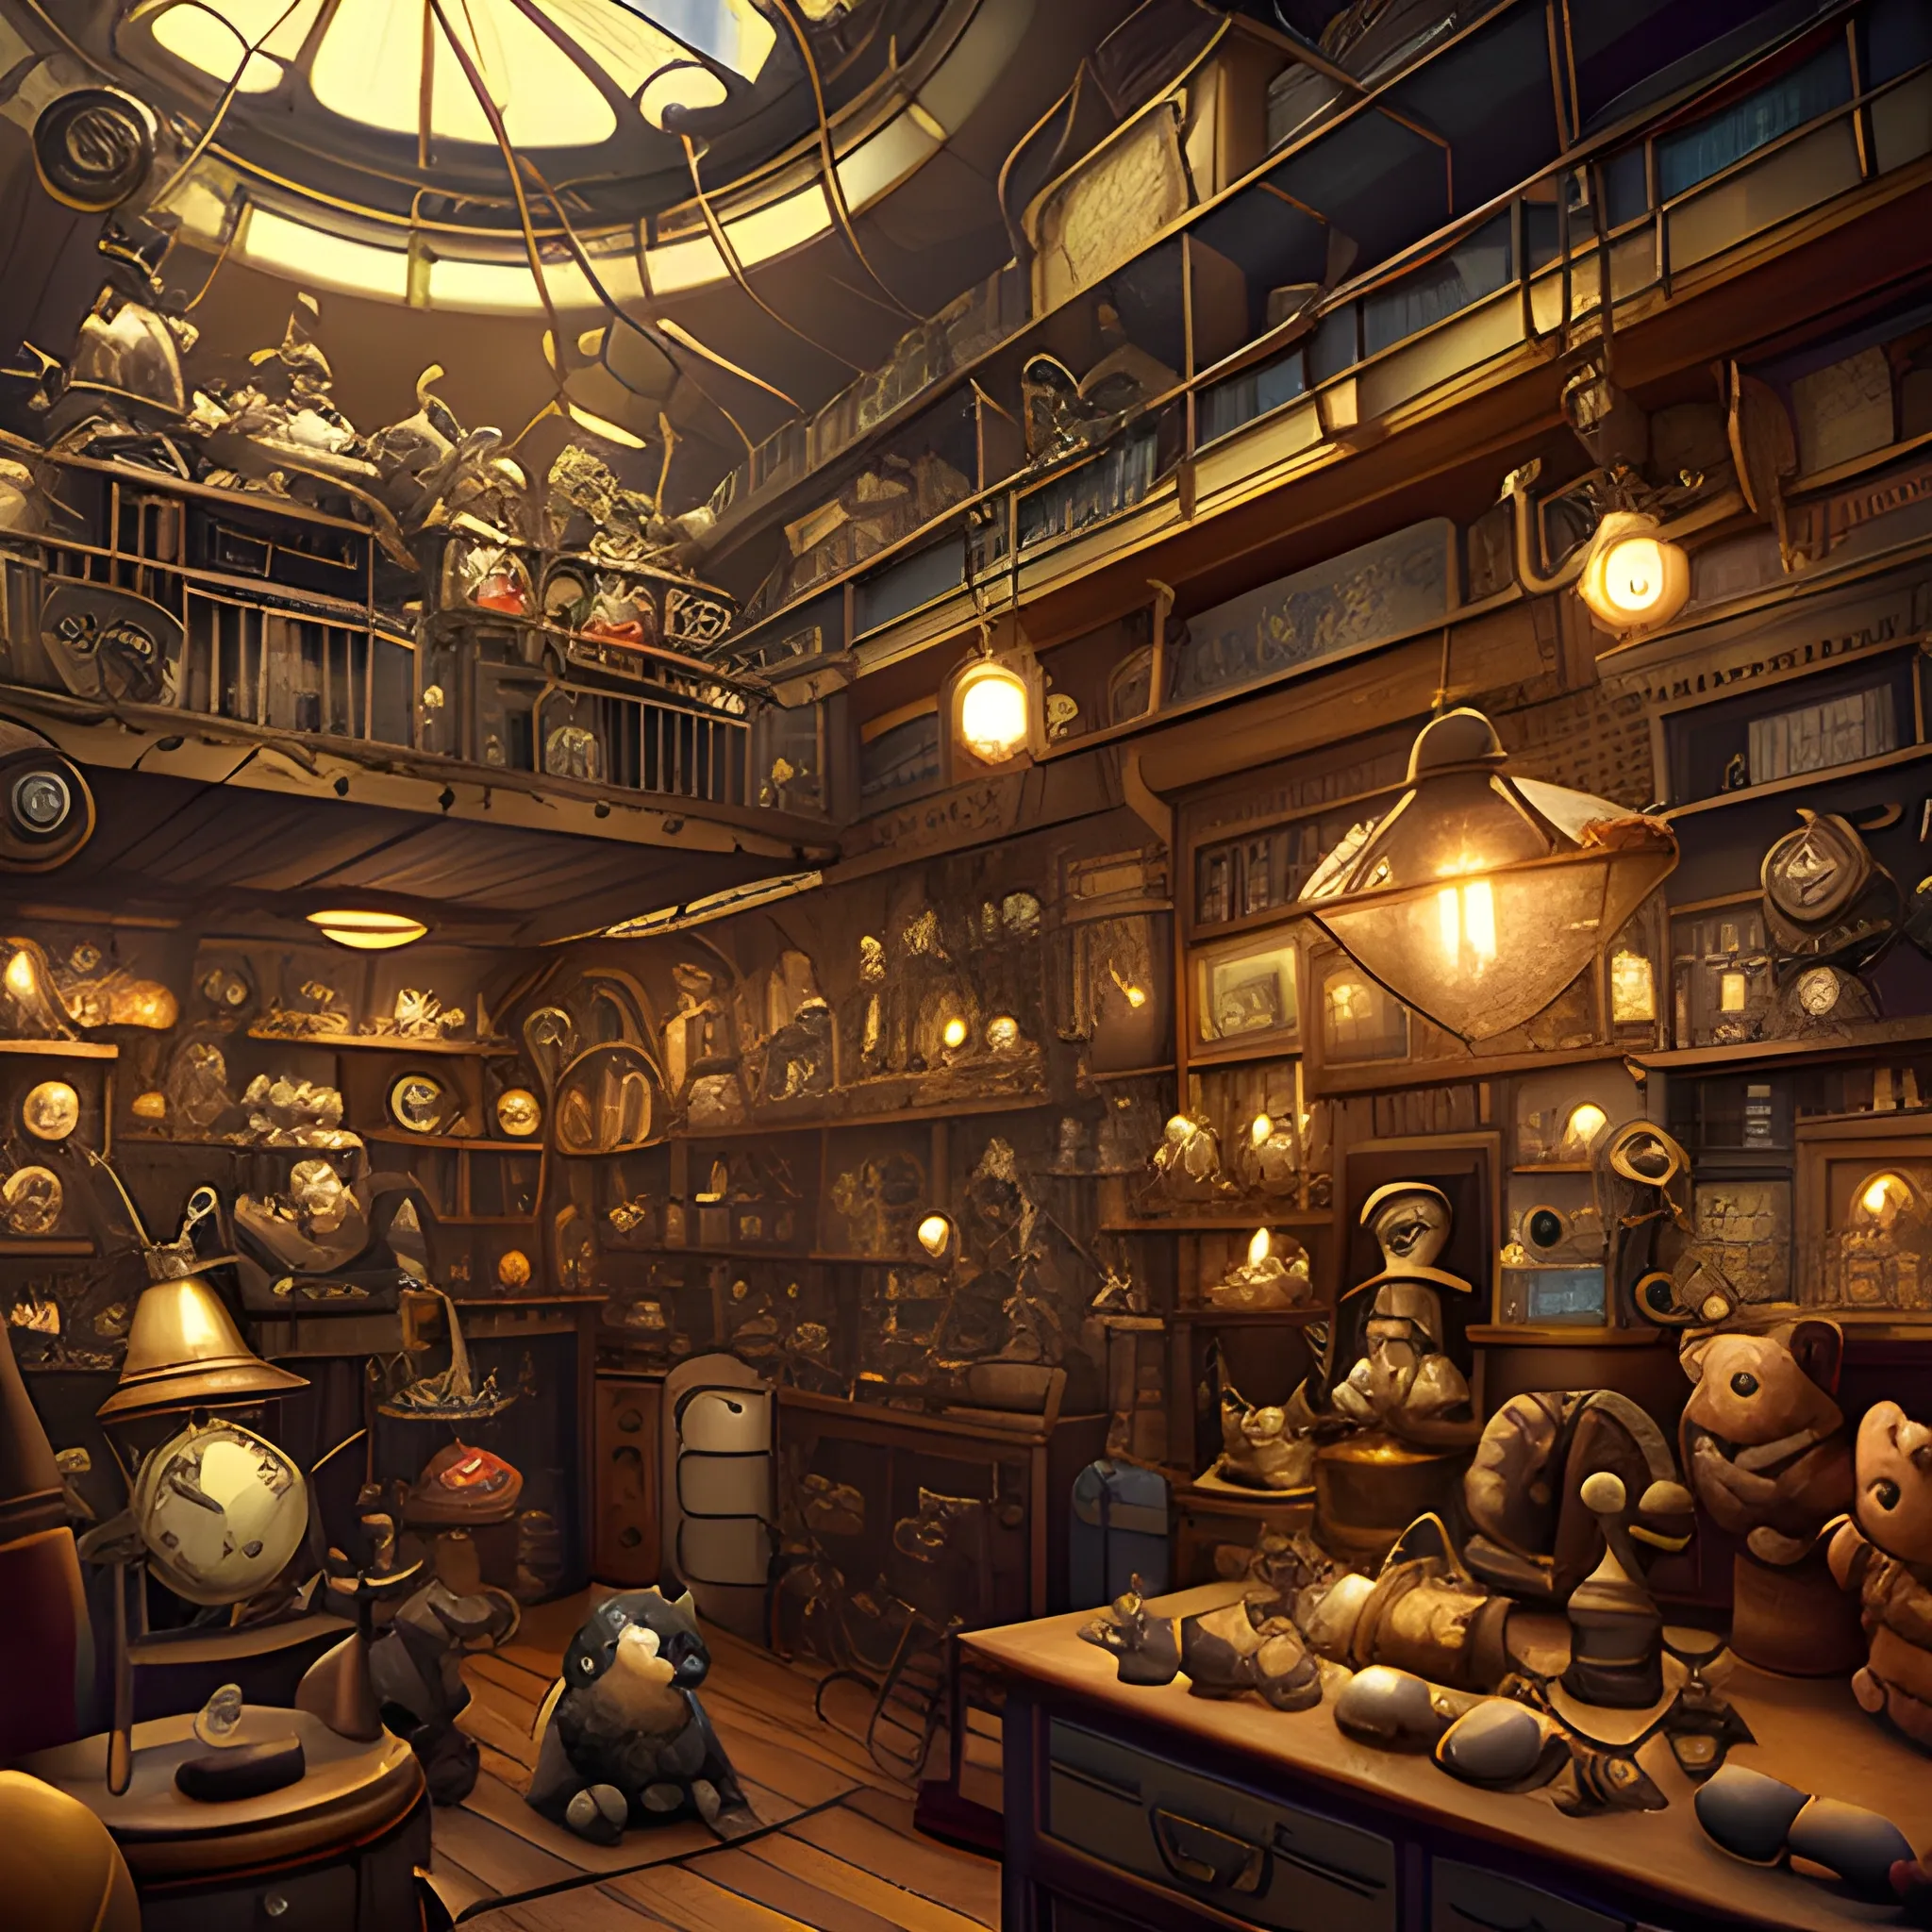 Stuffed toys filled a steampunk antique store in an airship, film quality, unreal engine, matte, award-winning, beautiful studio Darklight